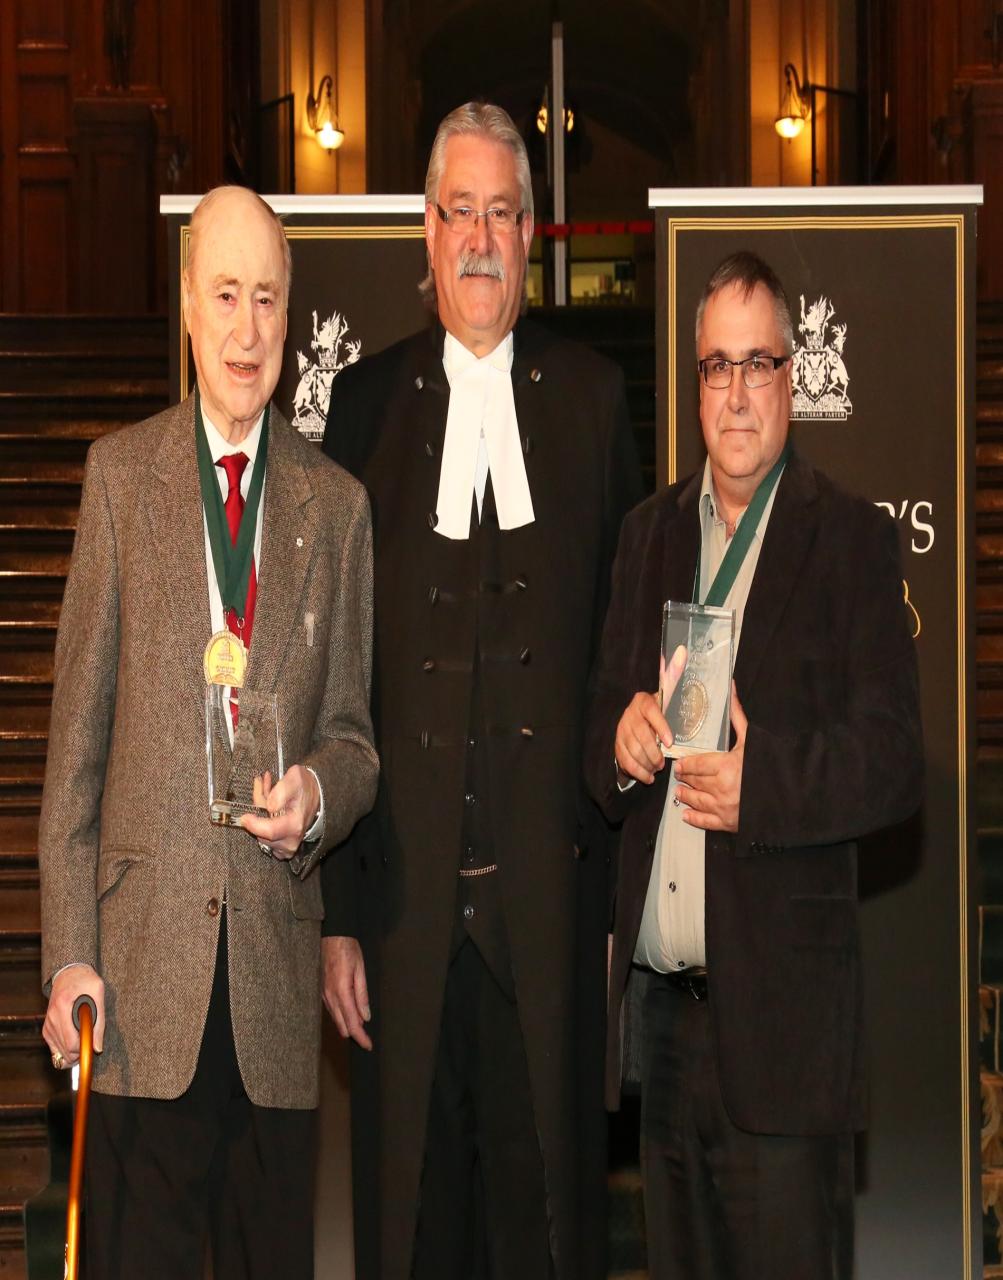 Photo of Red Kelly and David Dupuis, authors of the Red Kelly Story, with Speaker Dave Levac